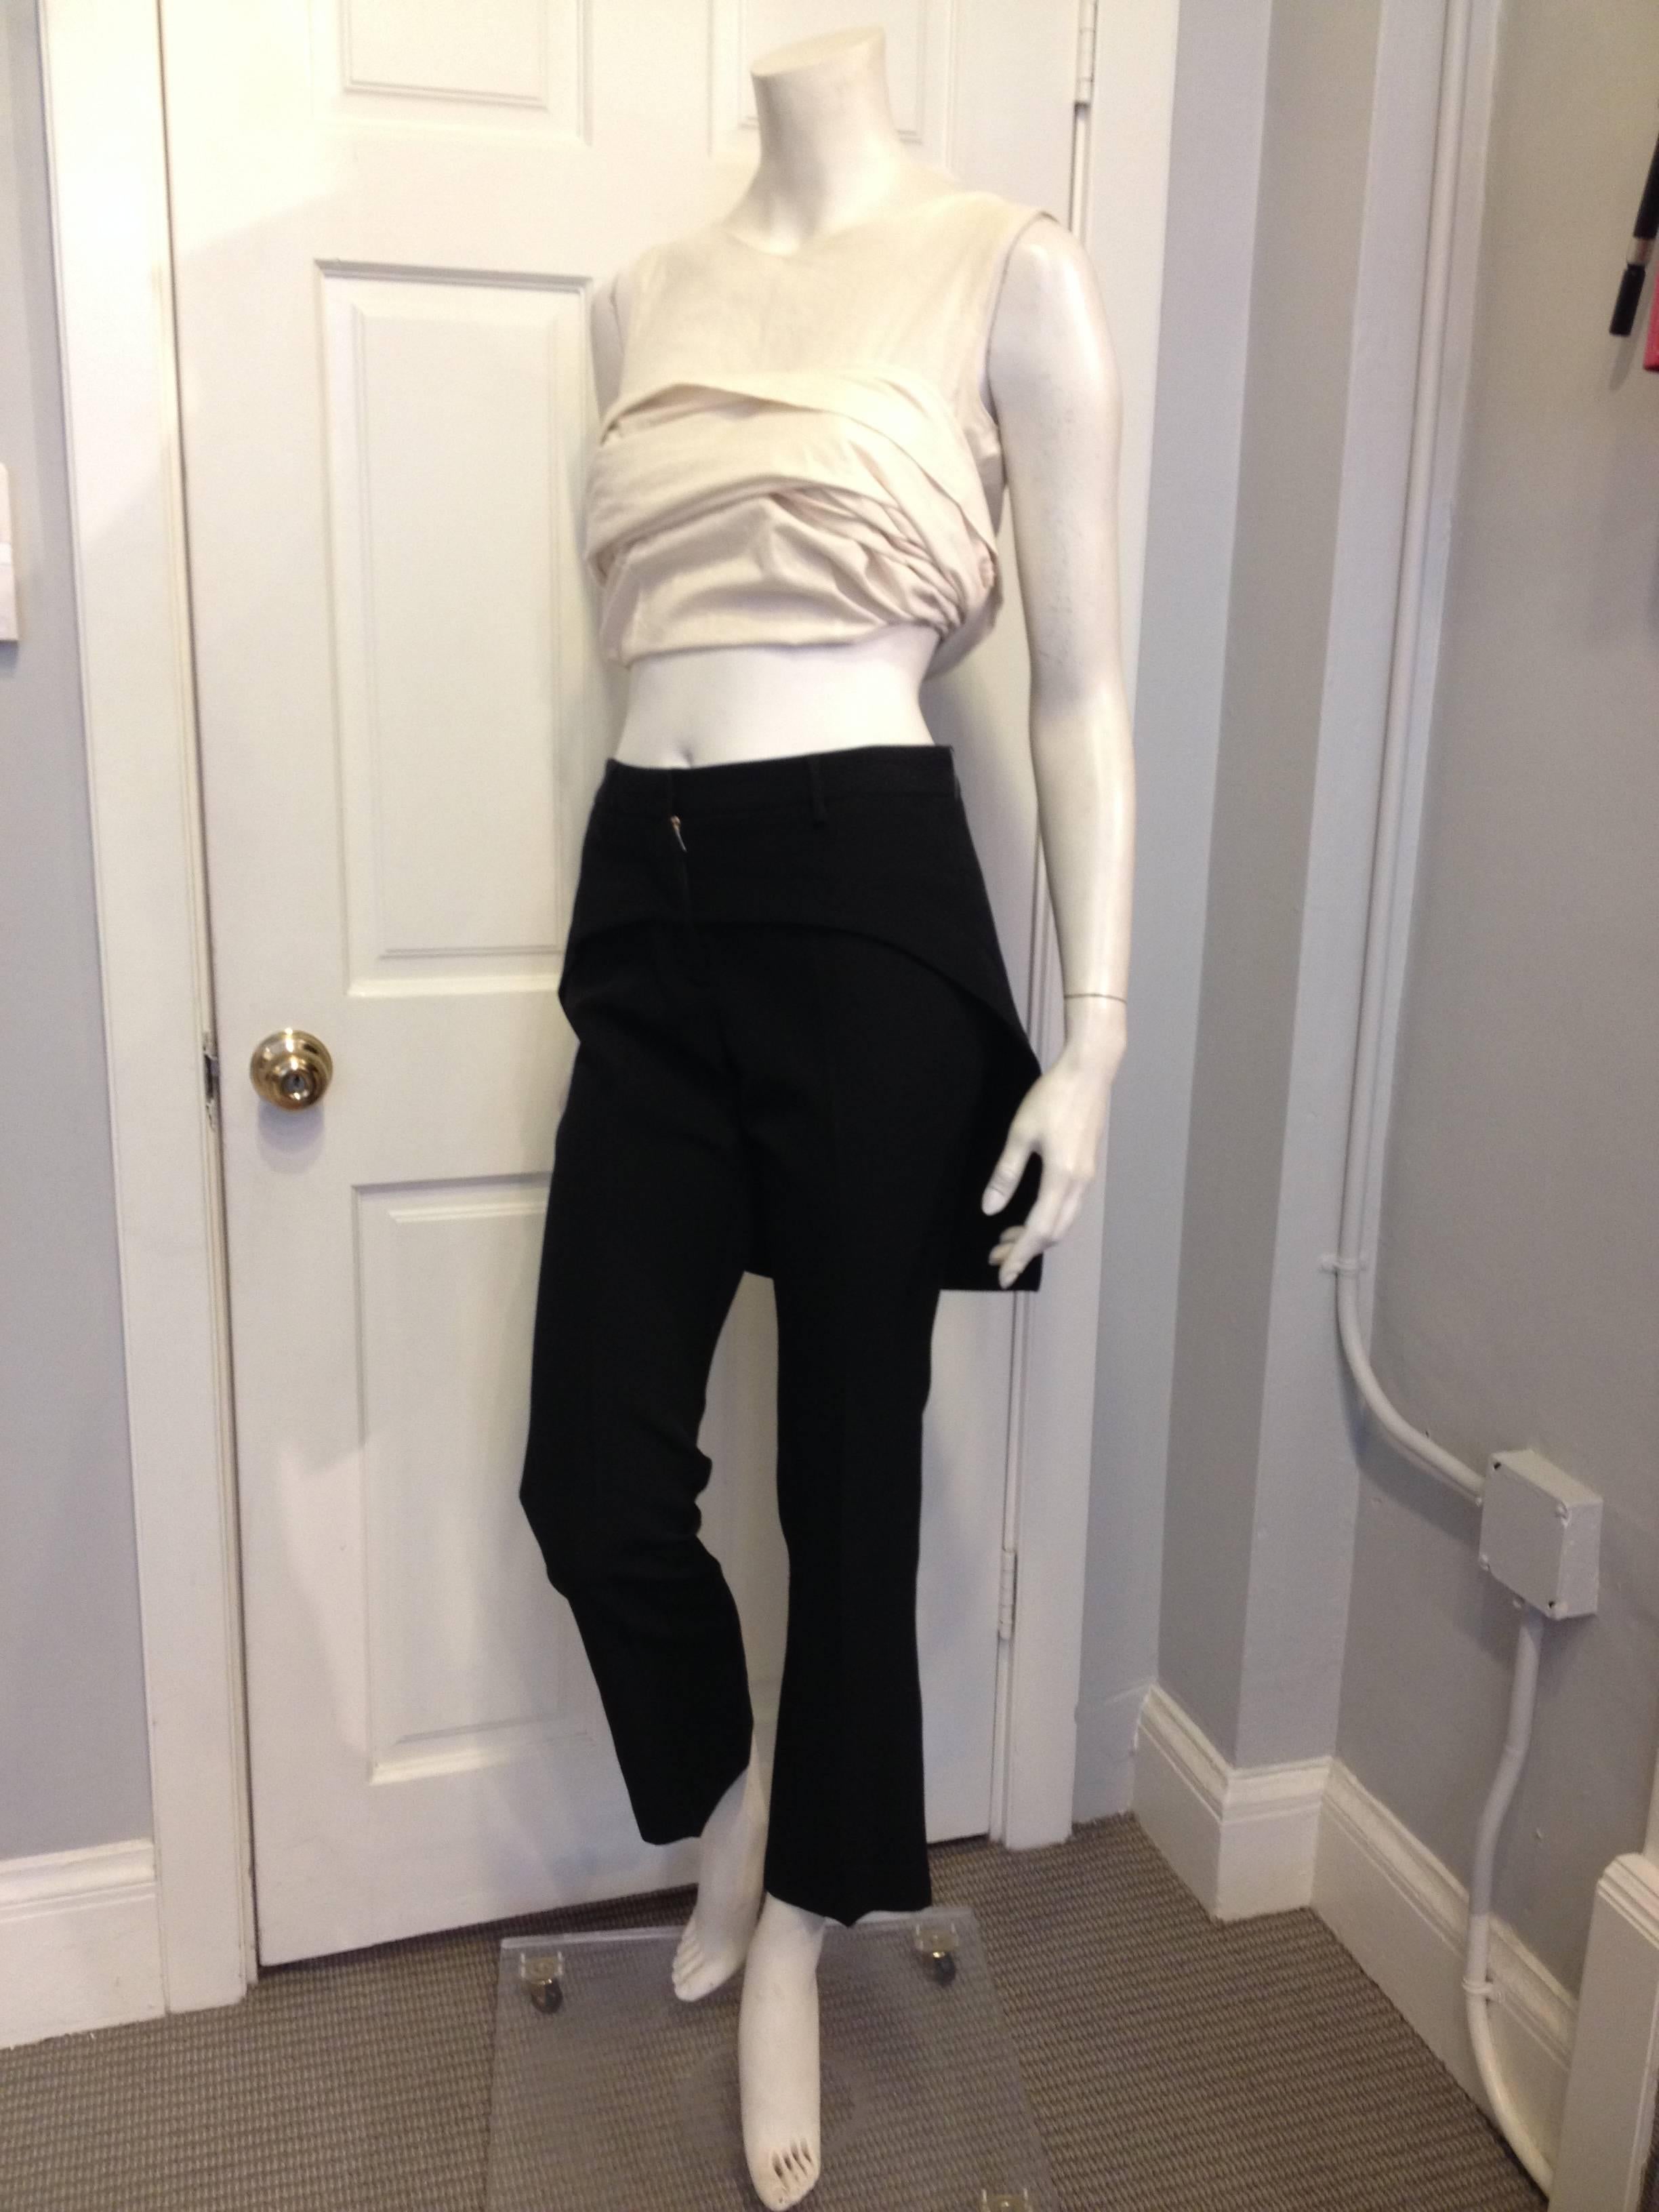 So cool! These Givenchy pants are cut slim and crisp with a very slight flare at the ankle, and are accessorized with a skirt-like band around the waist creating a tailcoat hemline. These are so unusual but at the same time so easy to wear, the hem